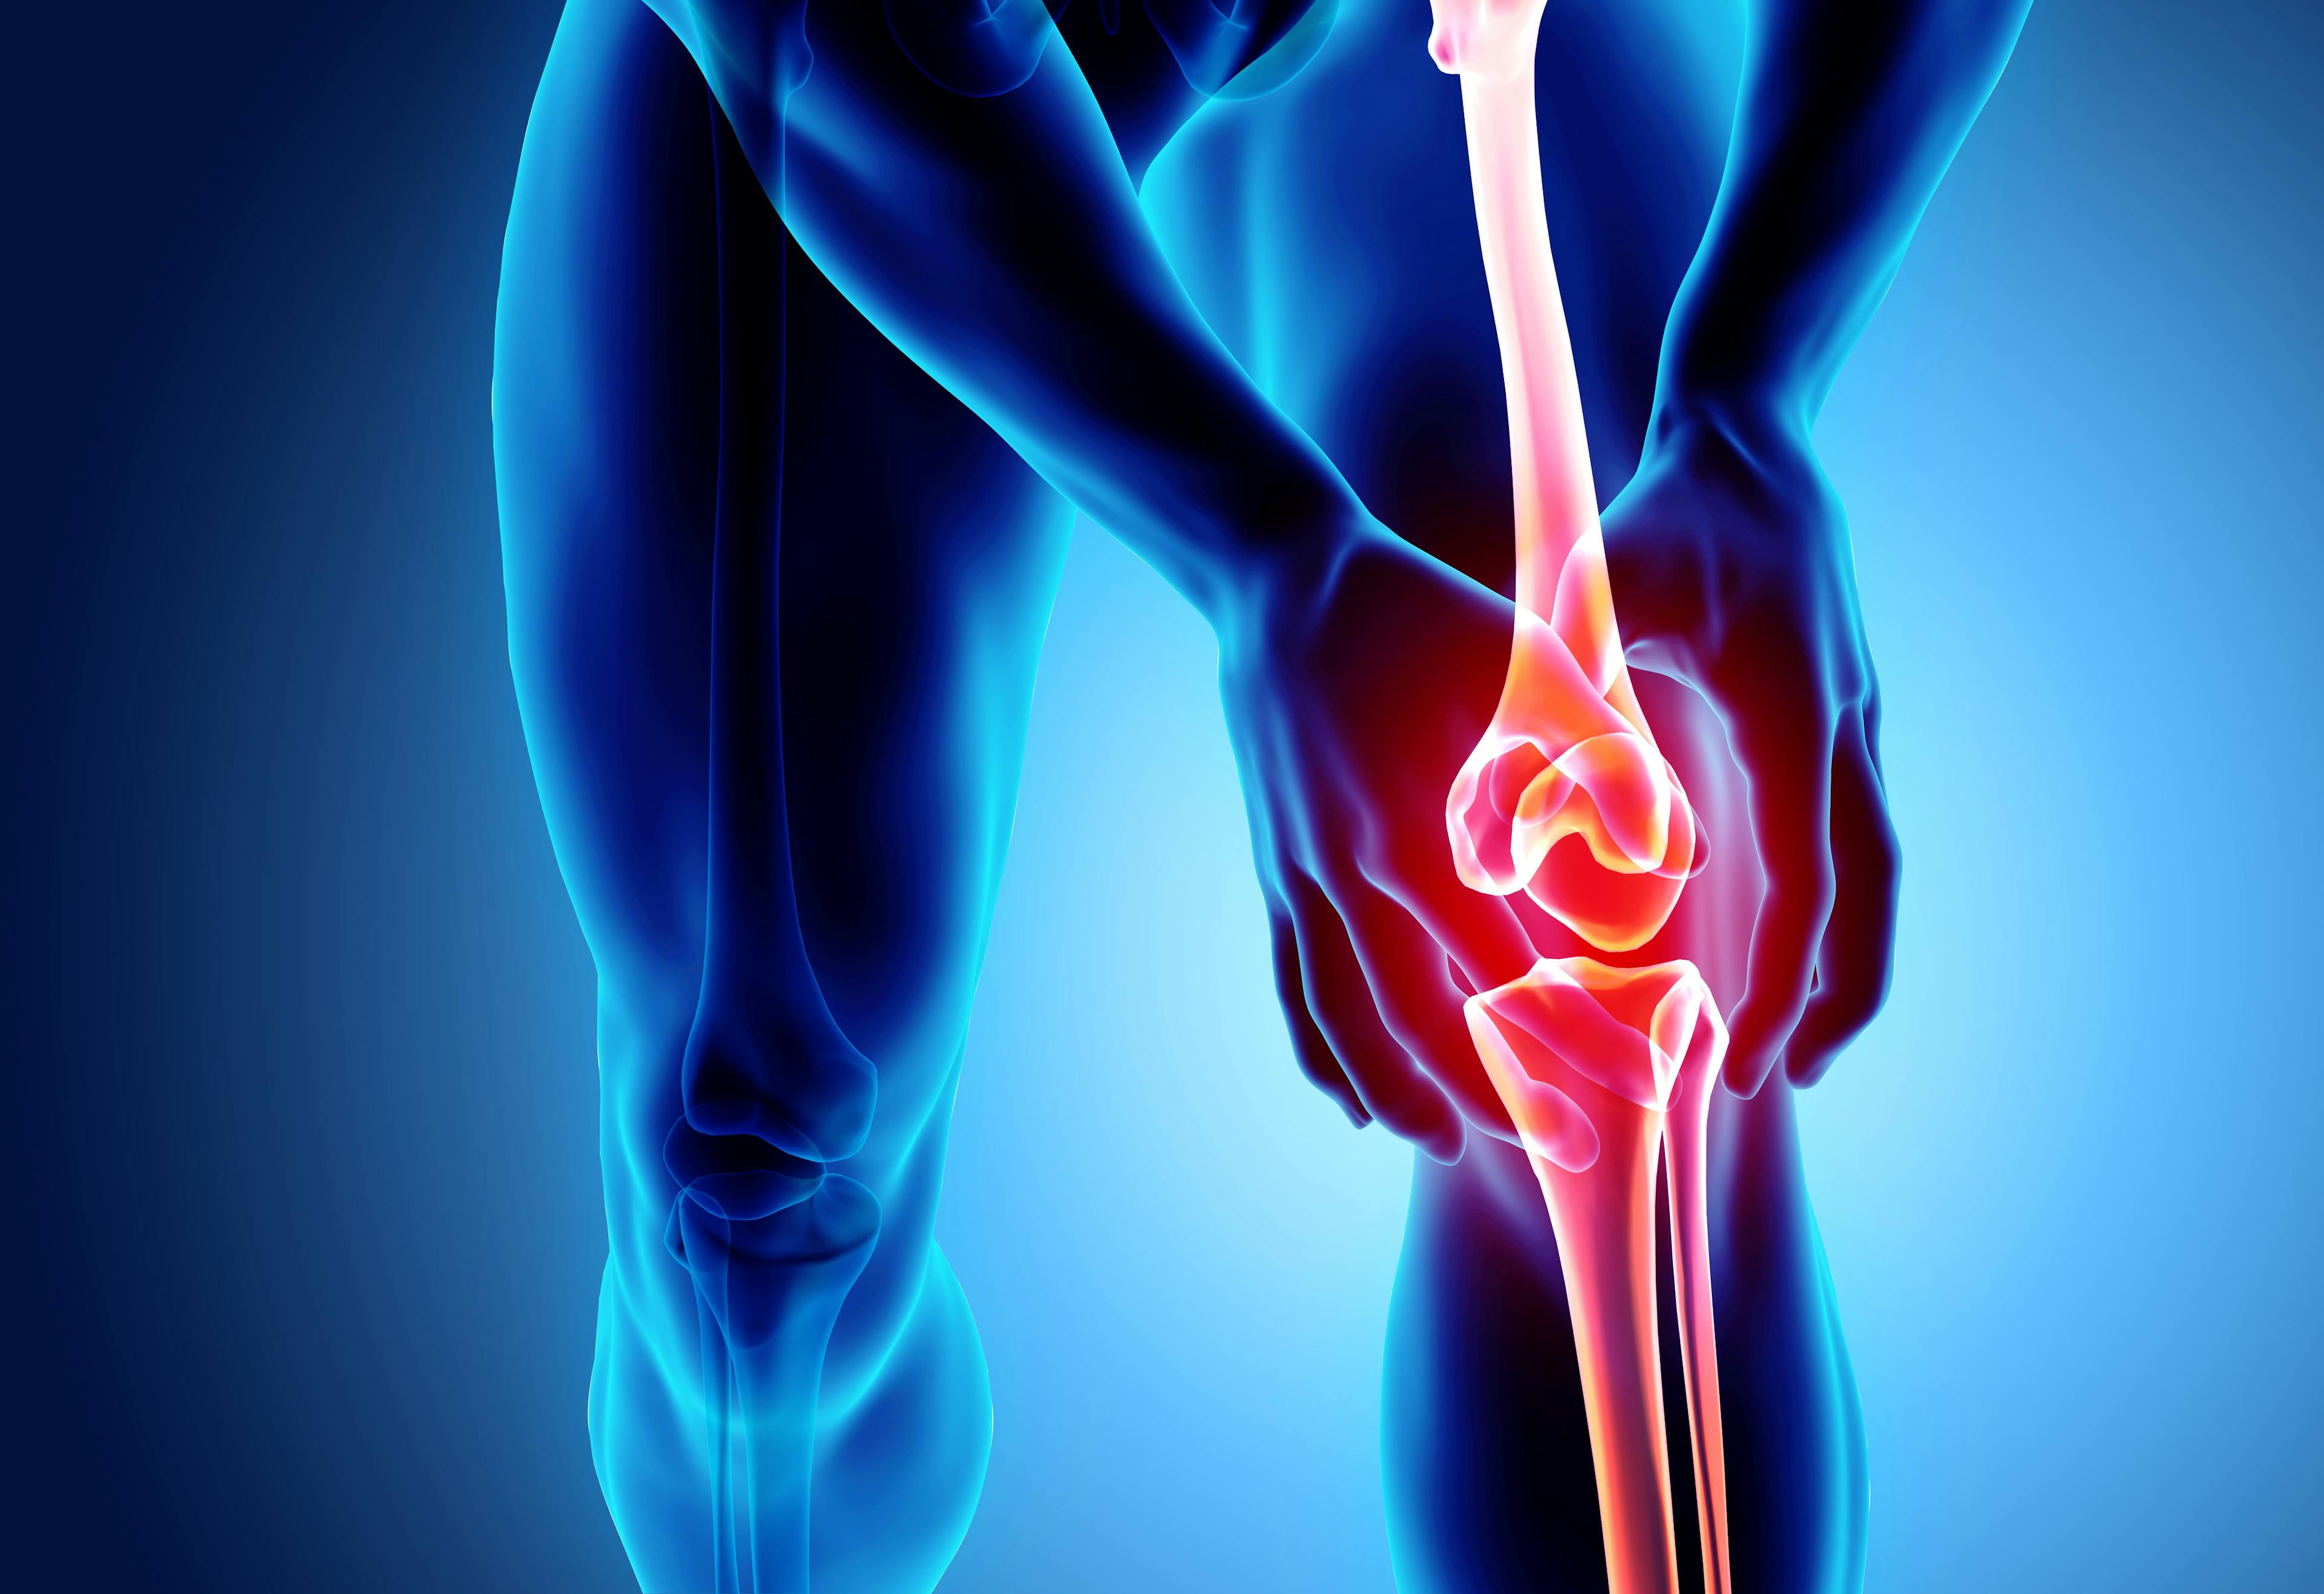 MSC Therapy Improves Pain, Stiffness, Function in Osteoarthritis Compared to Placebo 